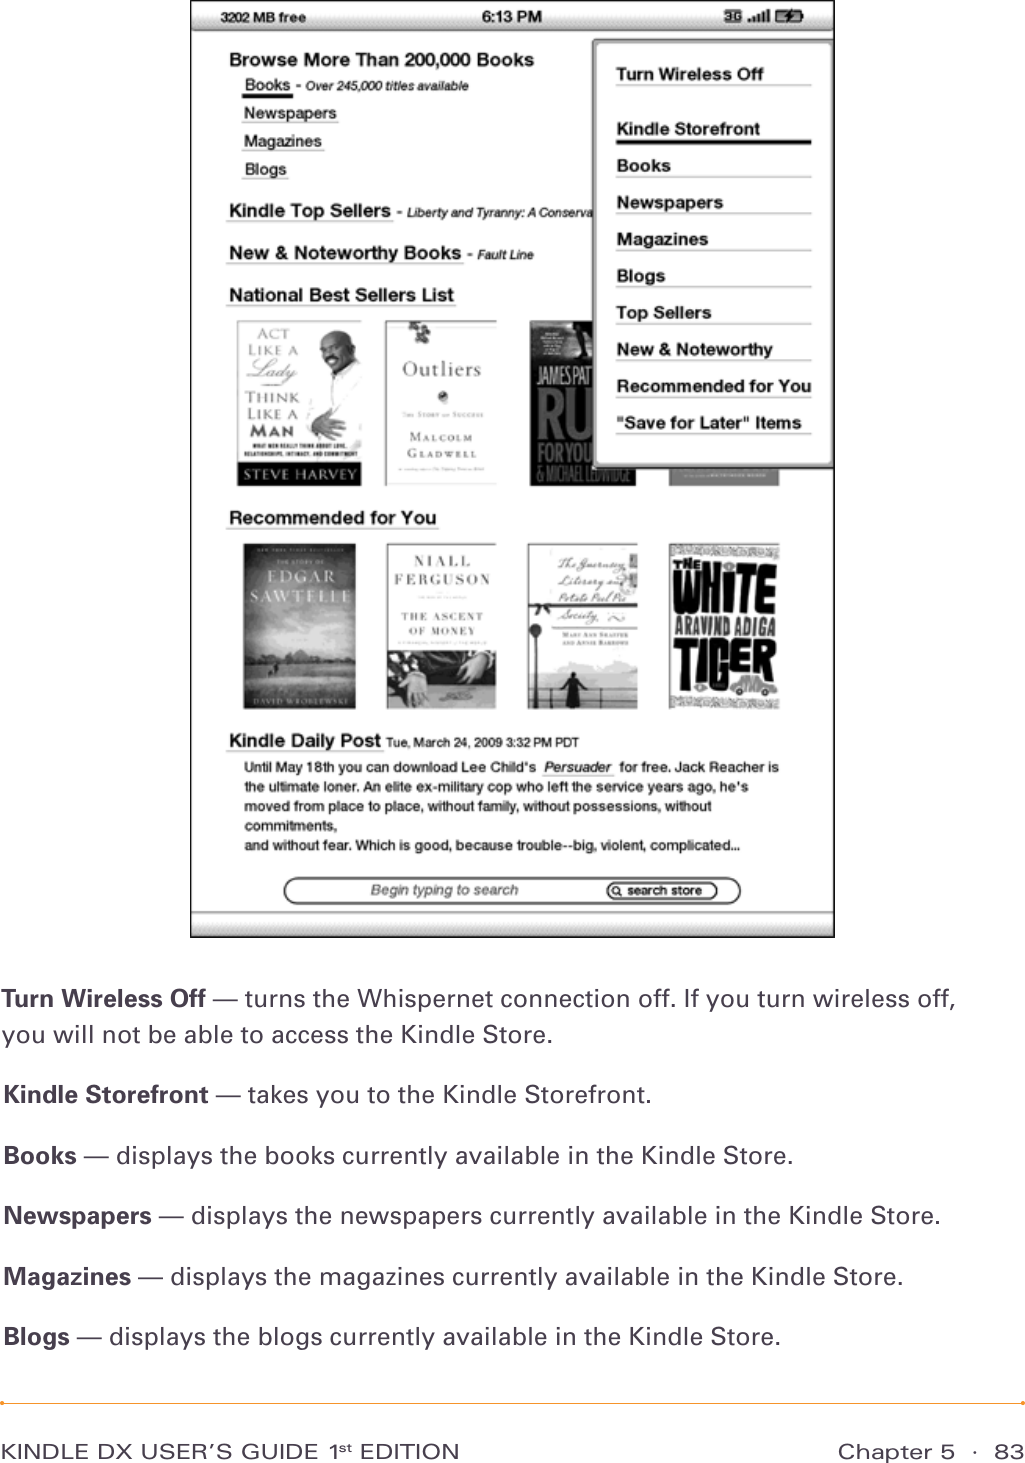 Chapter 5  ·  83KINDLE DX USER’S GUIDE 1st EDITIONTurn Wireless Off — turns the Whispernet connection off. If you turn wireless off, you will not be able to access the Kindle Store.Kindle Storefront — takes you to the Kindle Storefront.Books — displays the books currently available in the Kindle Store.Newspapers — displays the newspapers currently available in the Kindle Store.Magazines — displays the magazines currently available in the Kindle Store.Blogs — displays the blogs currently available in the Kindle Store.